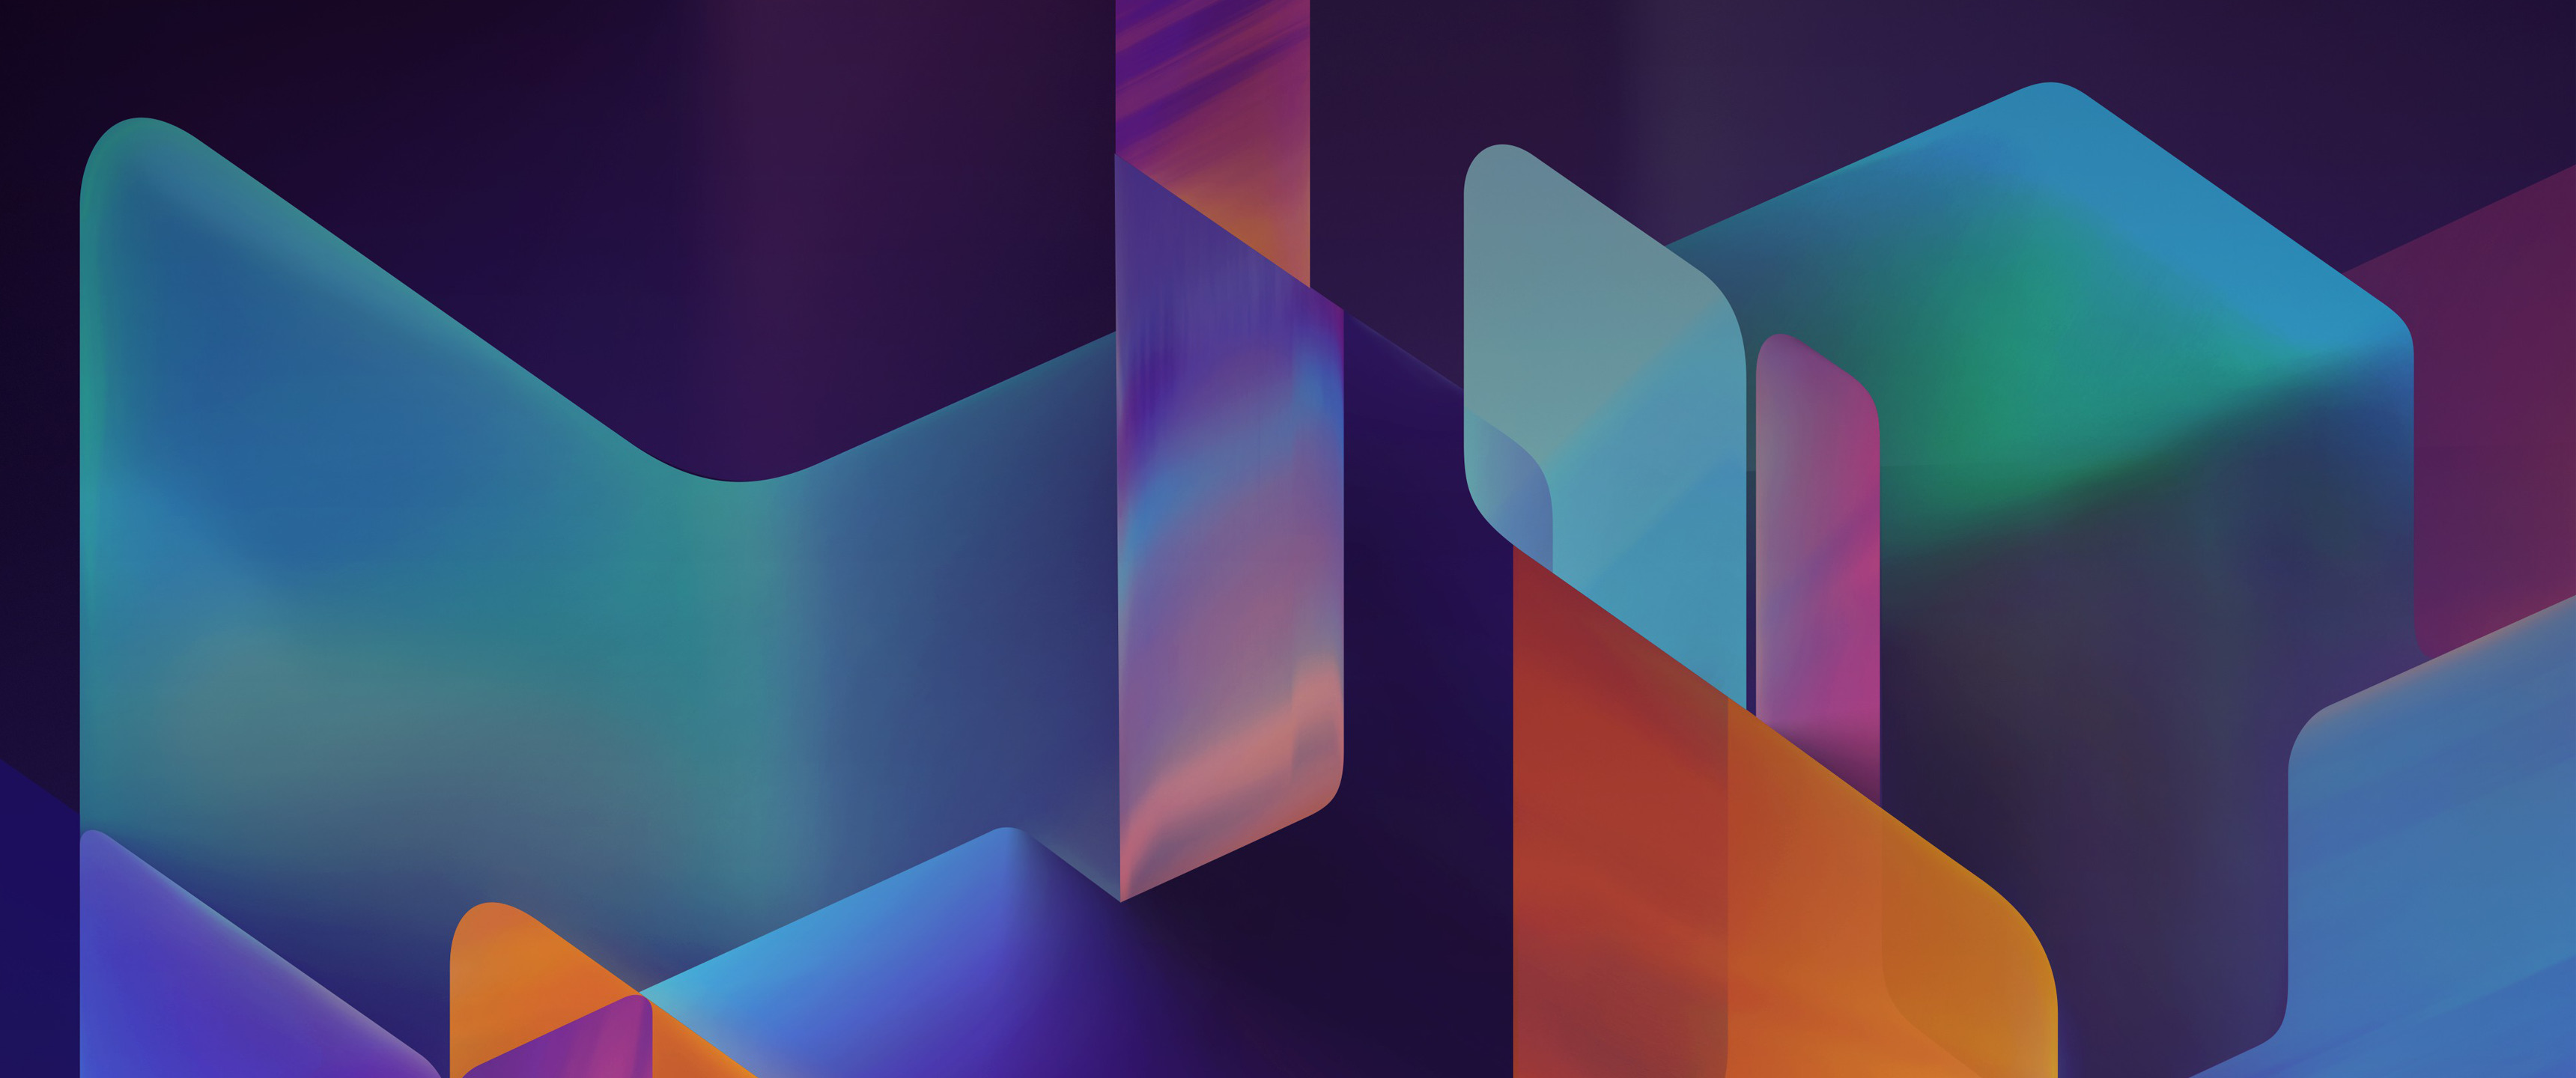 3440X1440 Abstract Wallpapers